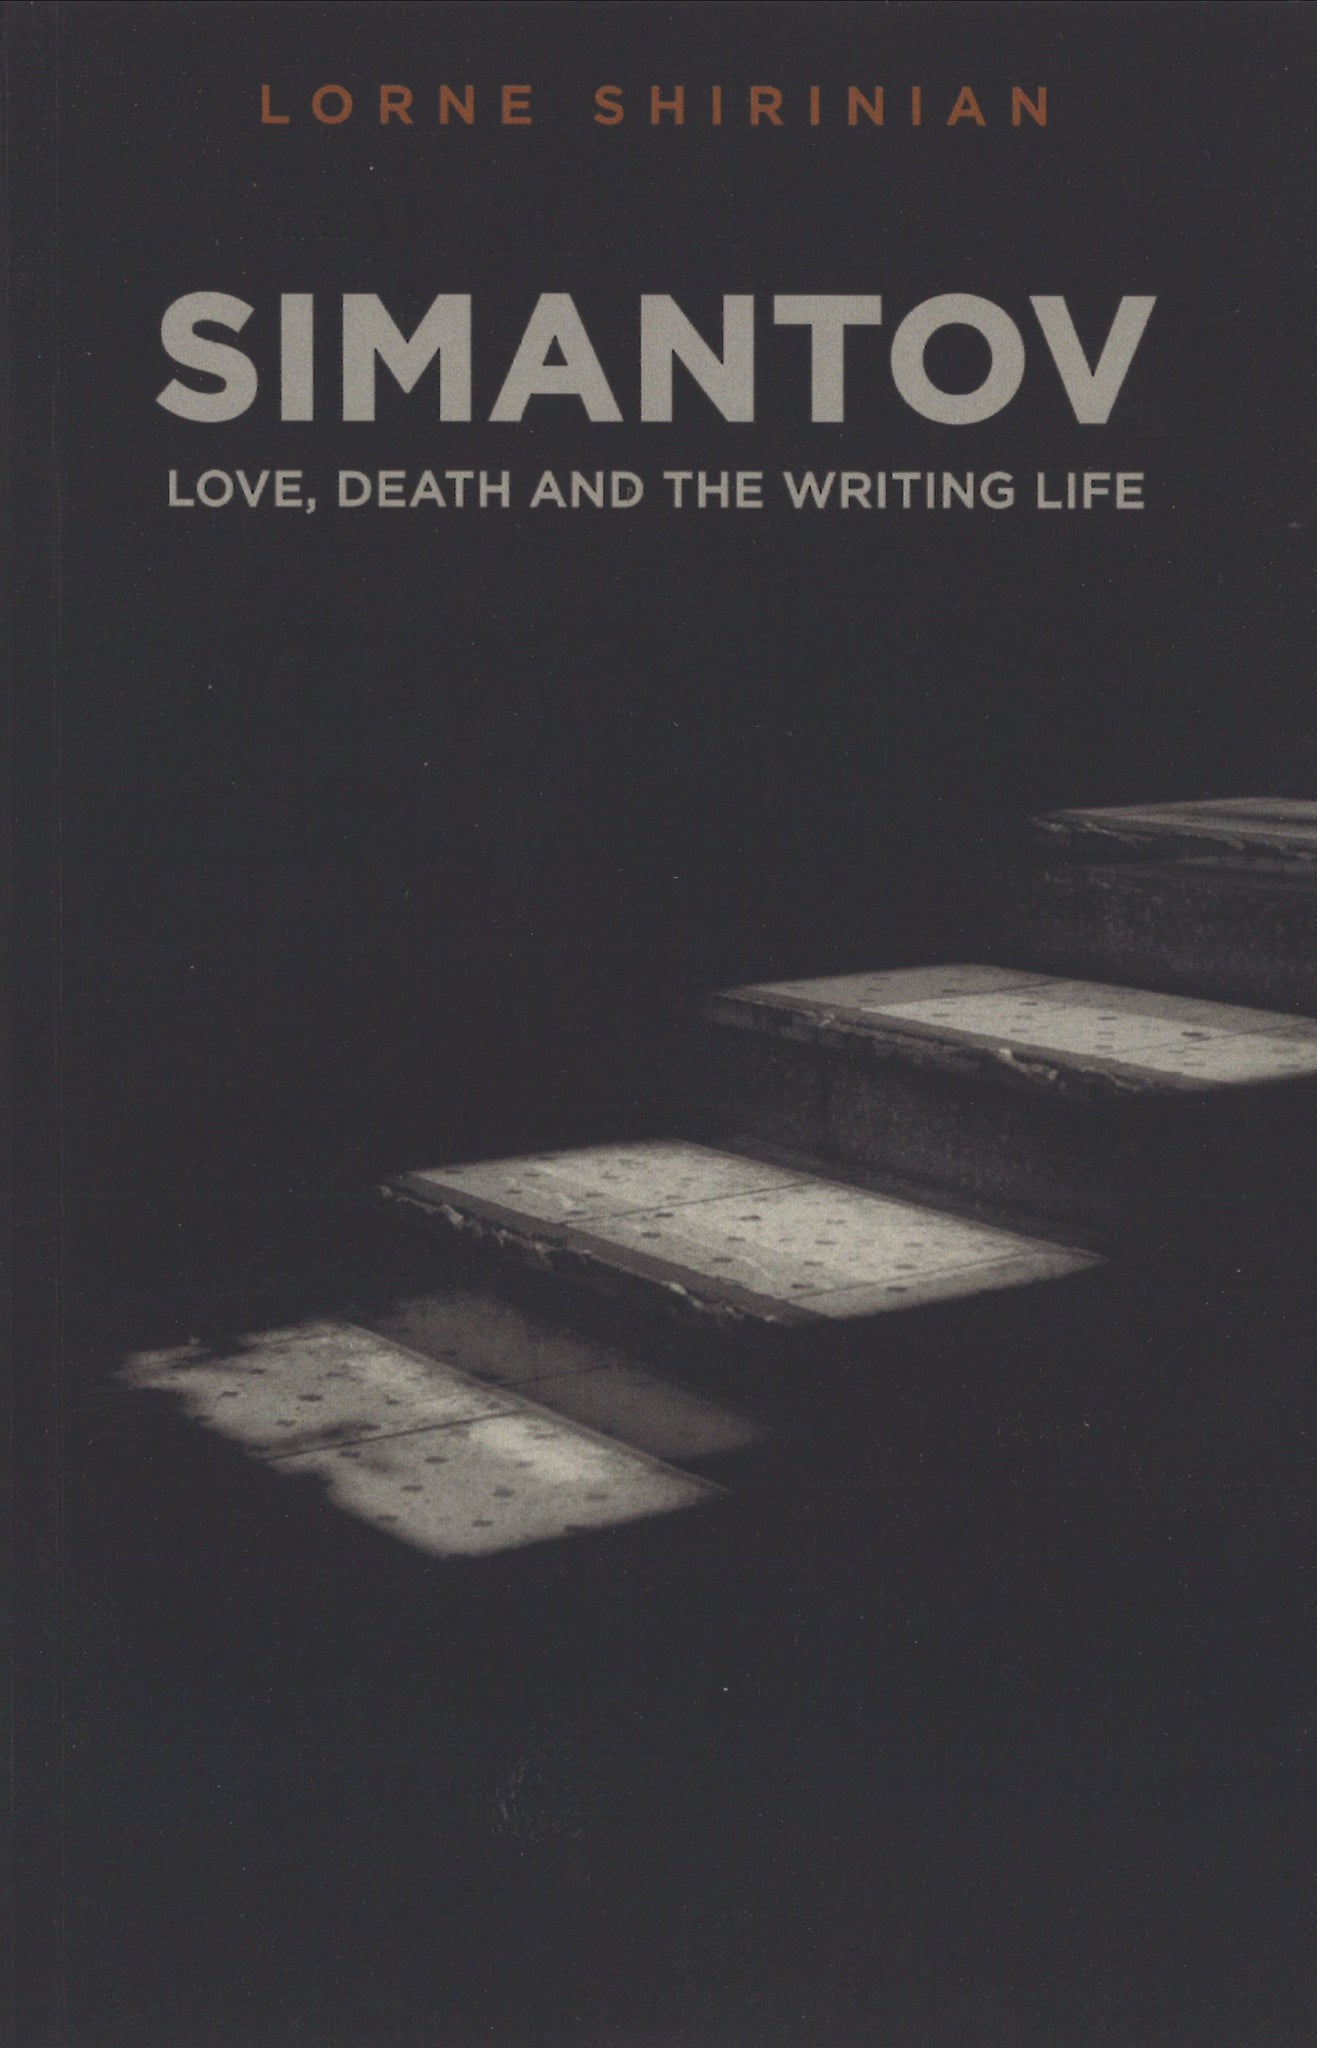 SIMANTOV: Love, Death and the Writing Life